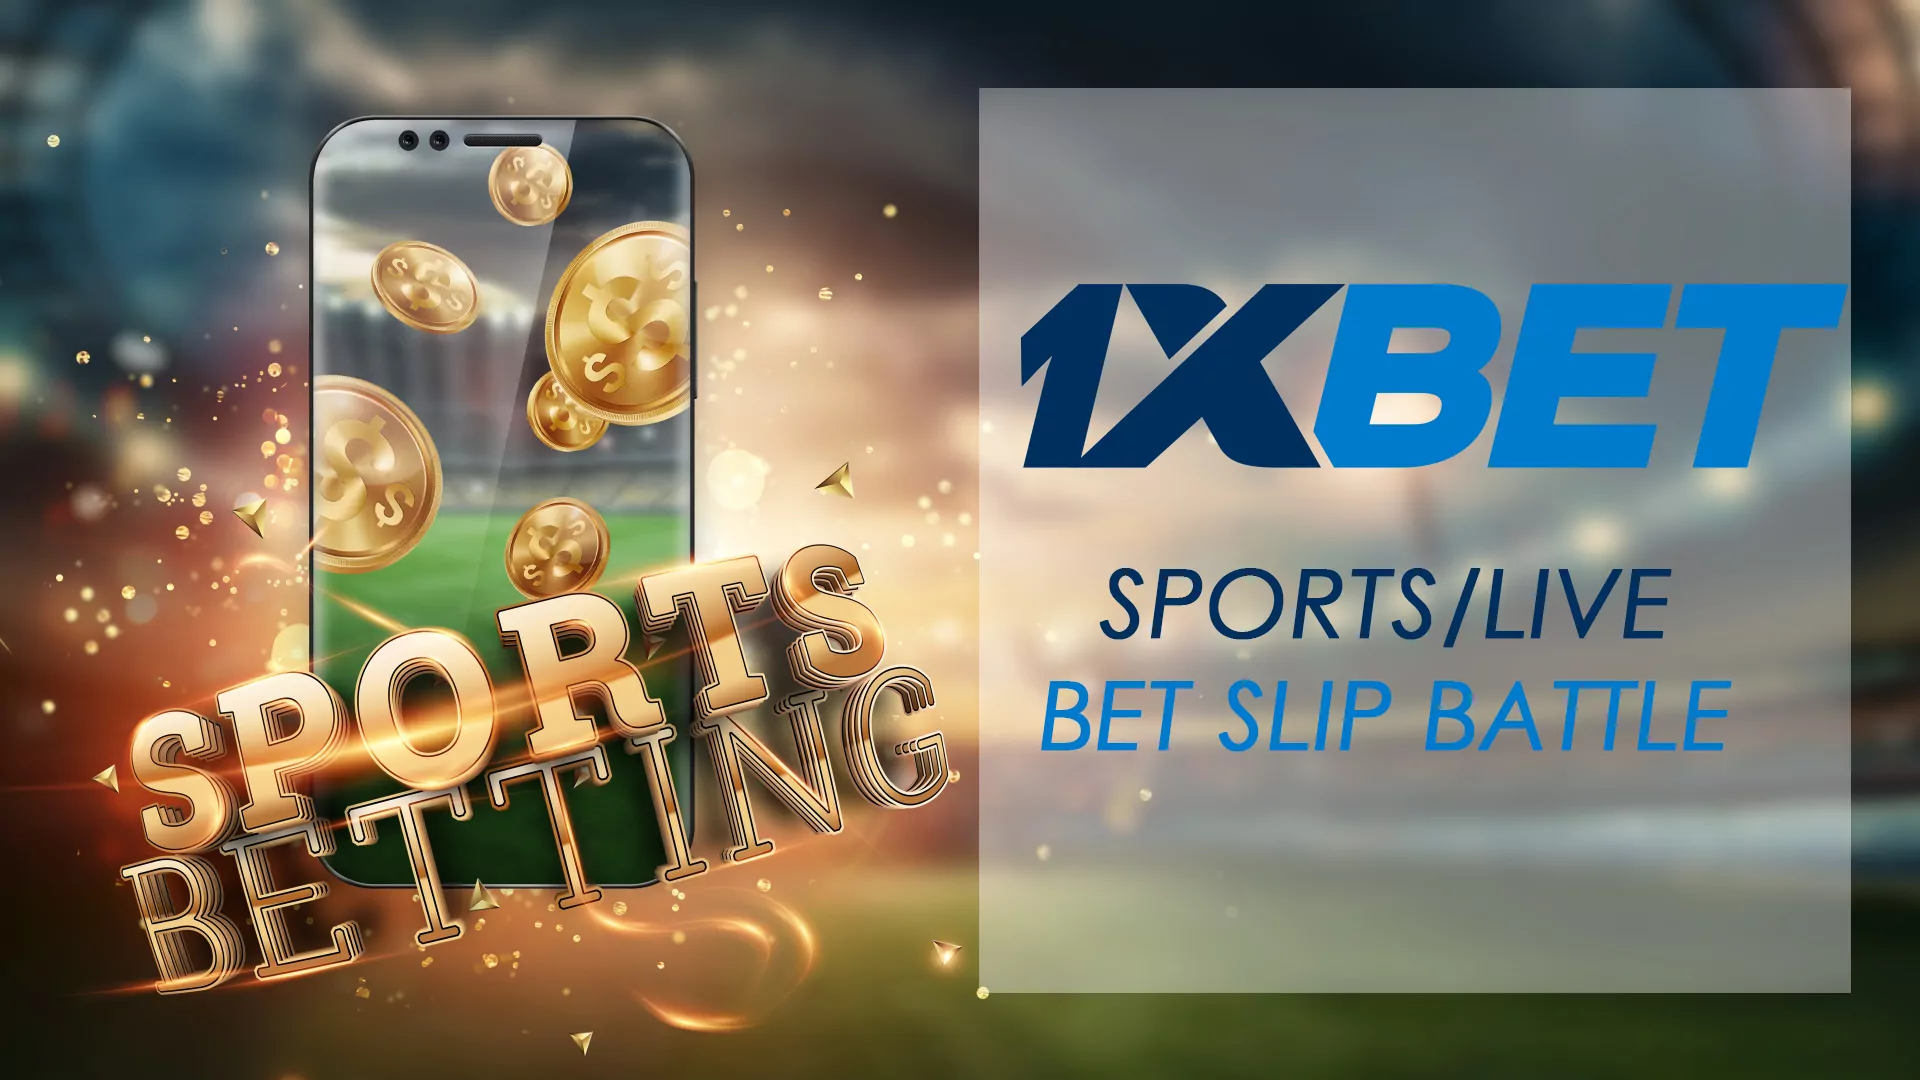 Place a bet with odds over 30 and if you win you get a bonus.